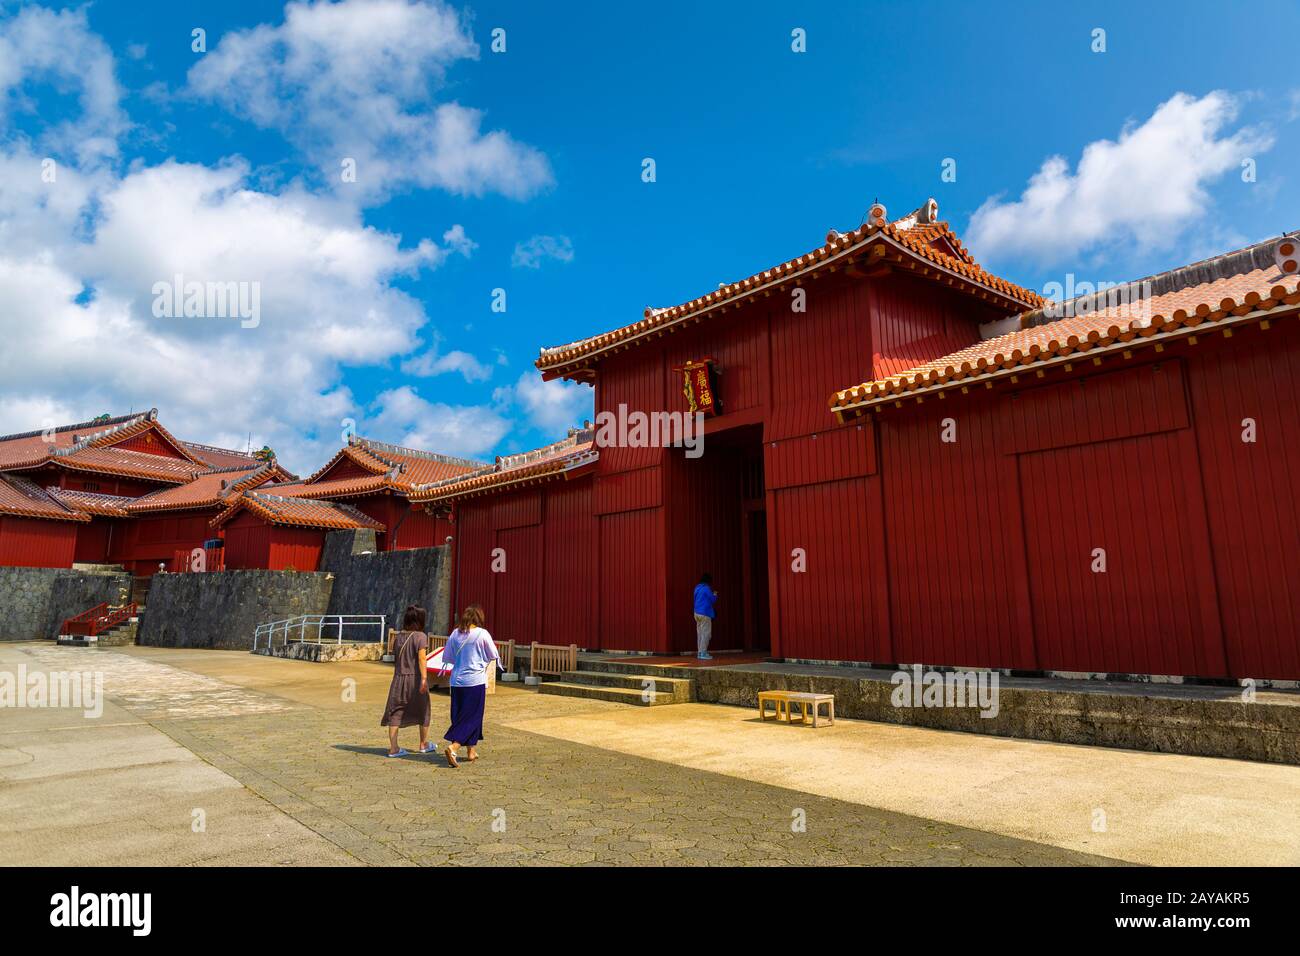 Shureimon Gate in Shuri castle in Okinawa, Japan. The wooden tablet that adorns the gate features Chinese characters that mean L Stock Photo